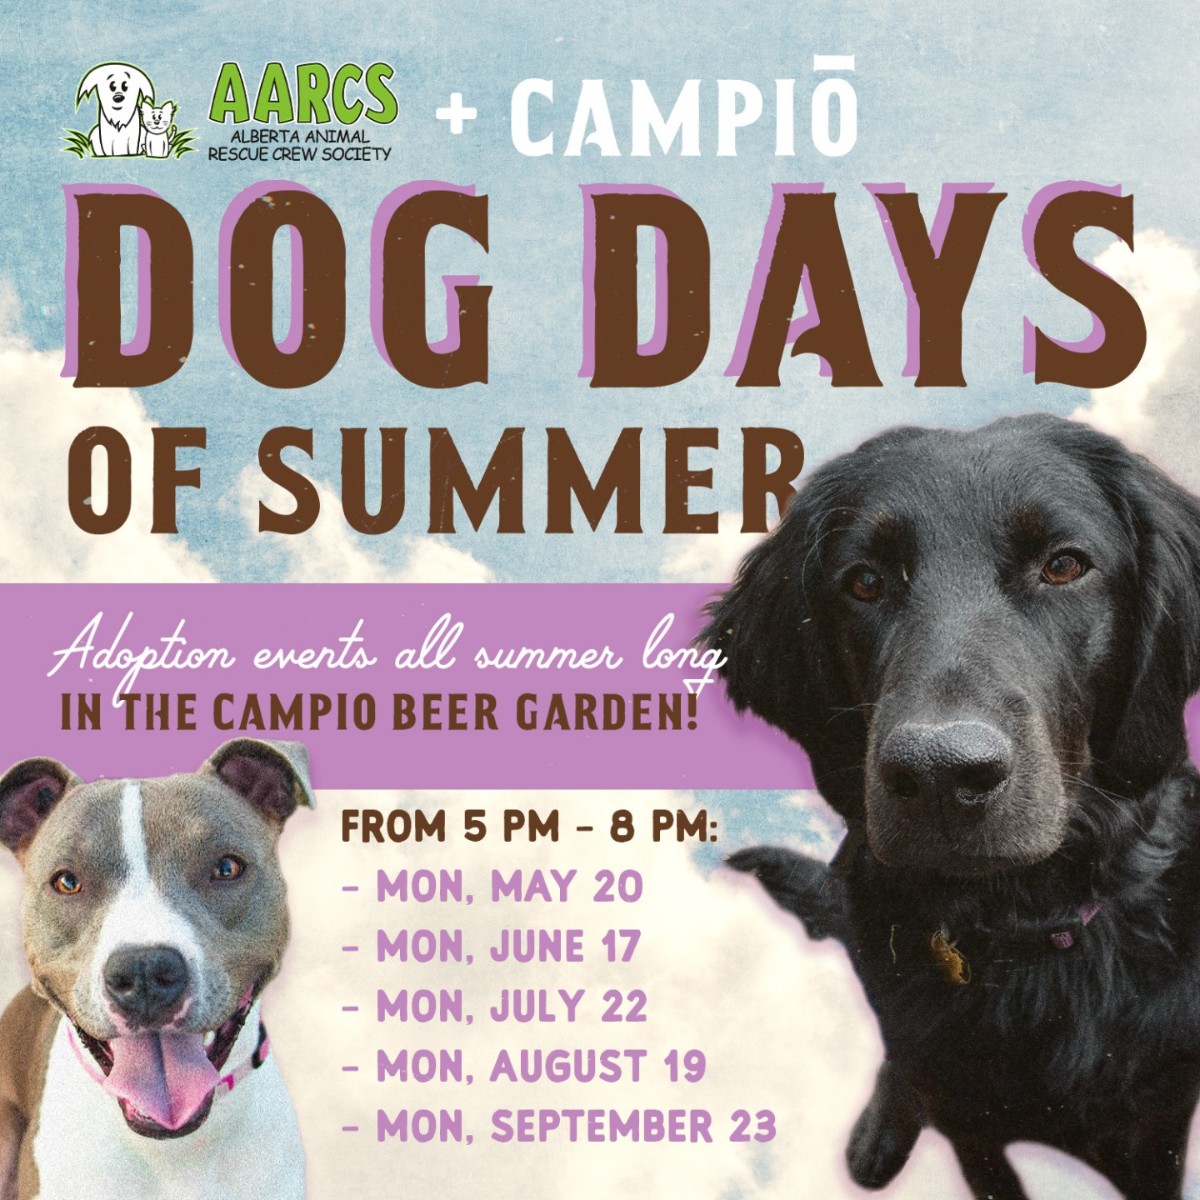 We've teamed up with Alberta Animal Rescue Crew Society (AARCS) to bring you Dog Days of Summer! One evening per month from May - September, AARCS will be onsite with some of YEG's most eligible adoptable dogs! Gather your pals and come on down to meet your new best friend 💛